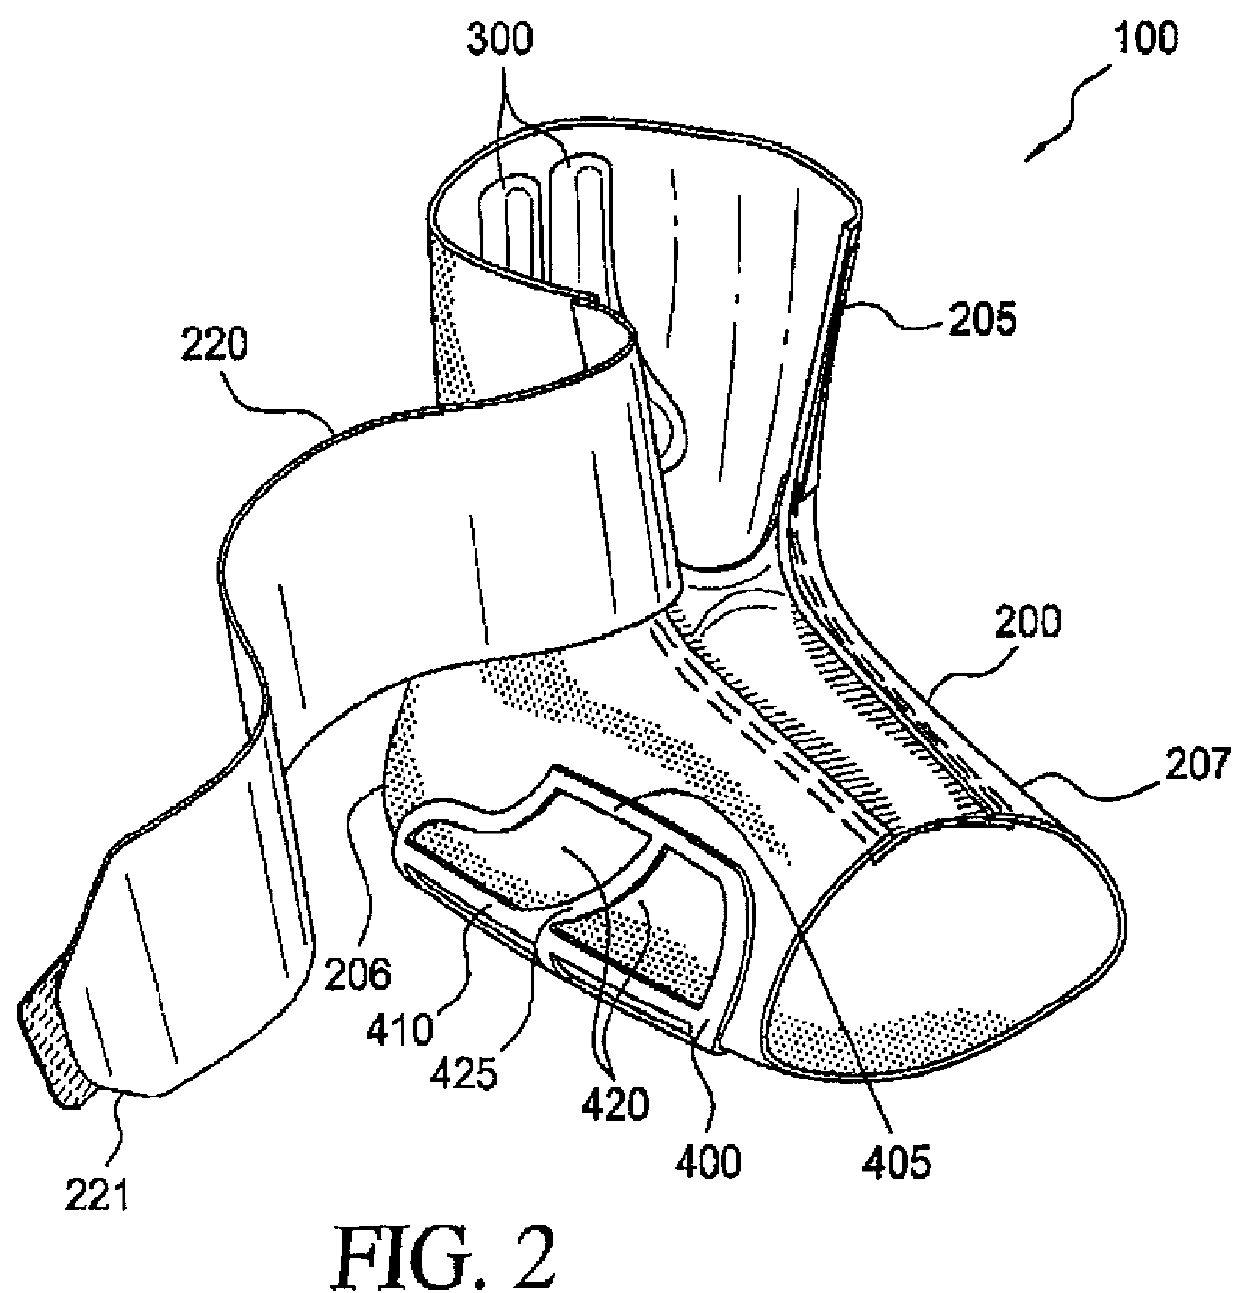 Proprioceptive topical ankle gear and methods of use